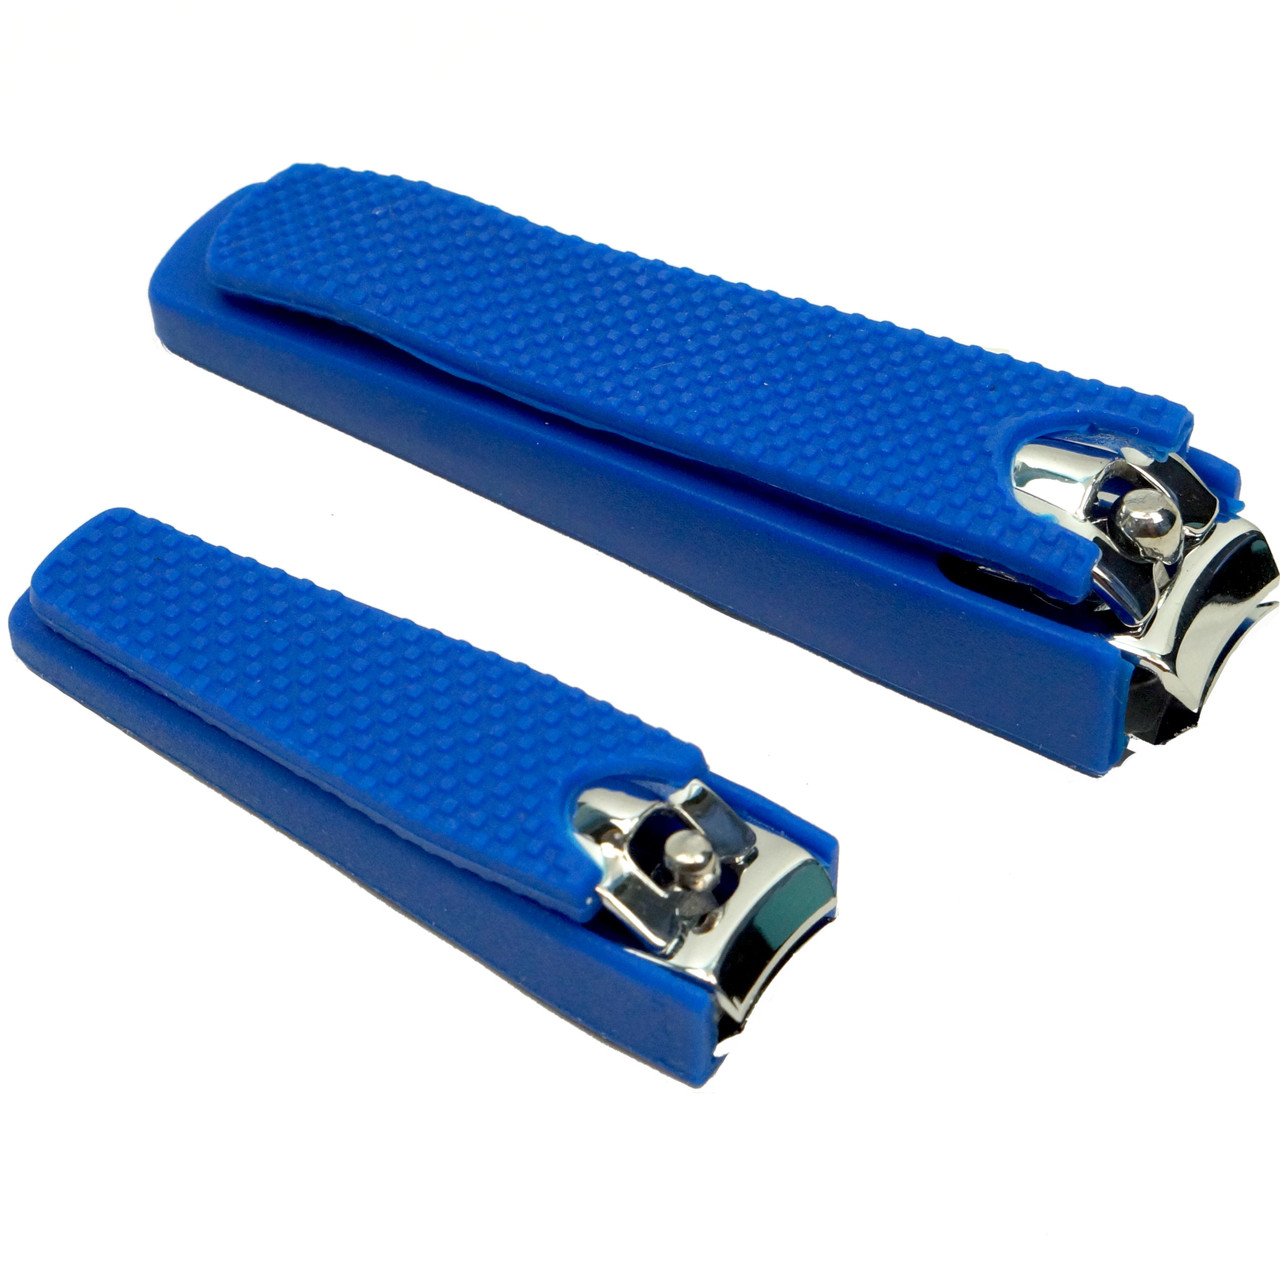 Foot Nail Clippers with Nail Catcher, Blue - Made in Germany